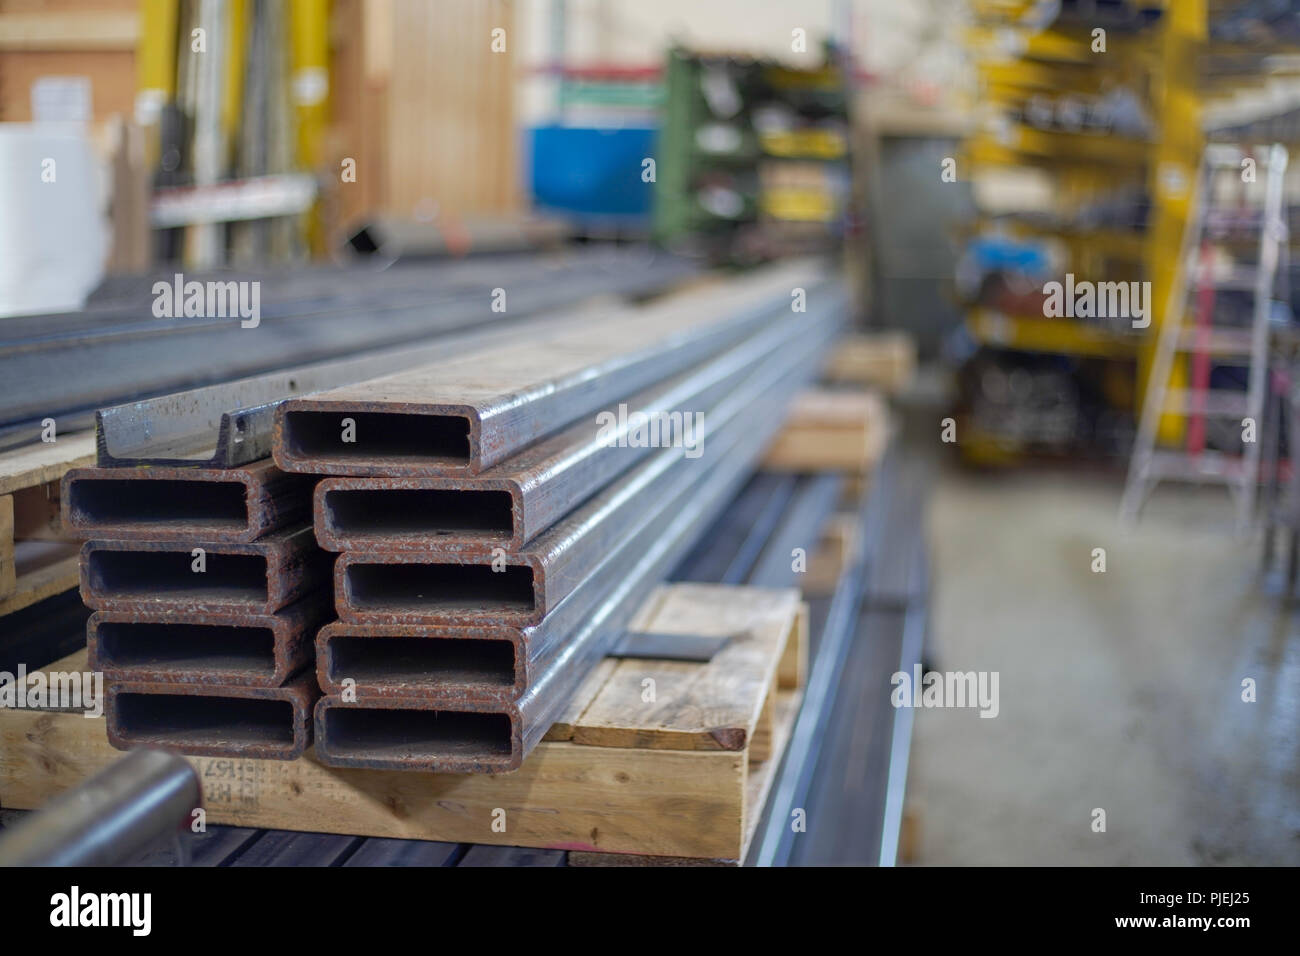 Structural steel tubes stacked on a skid, with material storage racks and fabrication plant in background Stock Photo